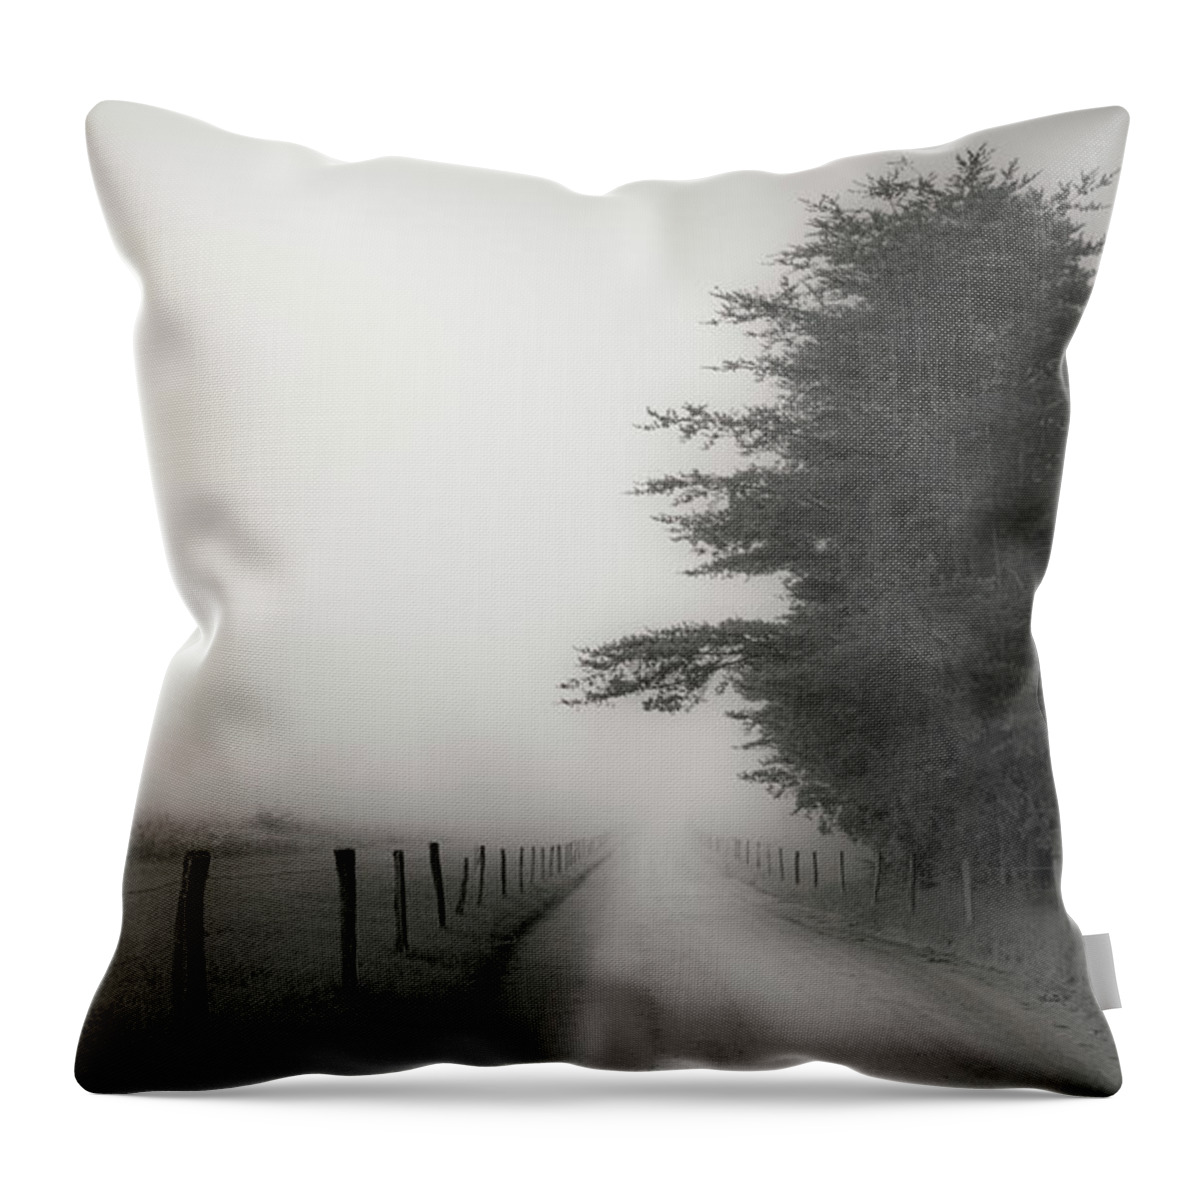 Landscapes Throw Pillow featuring the photograph Morning on a Country Road by David Hilton